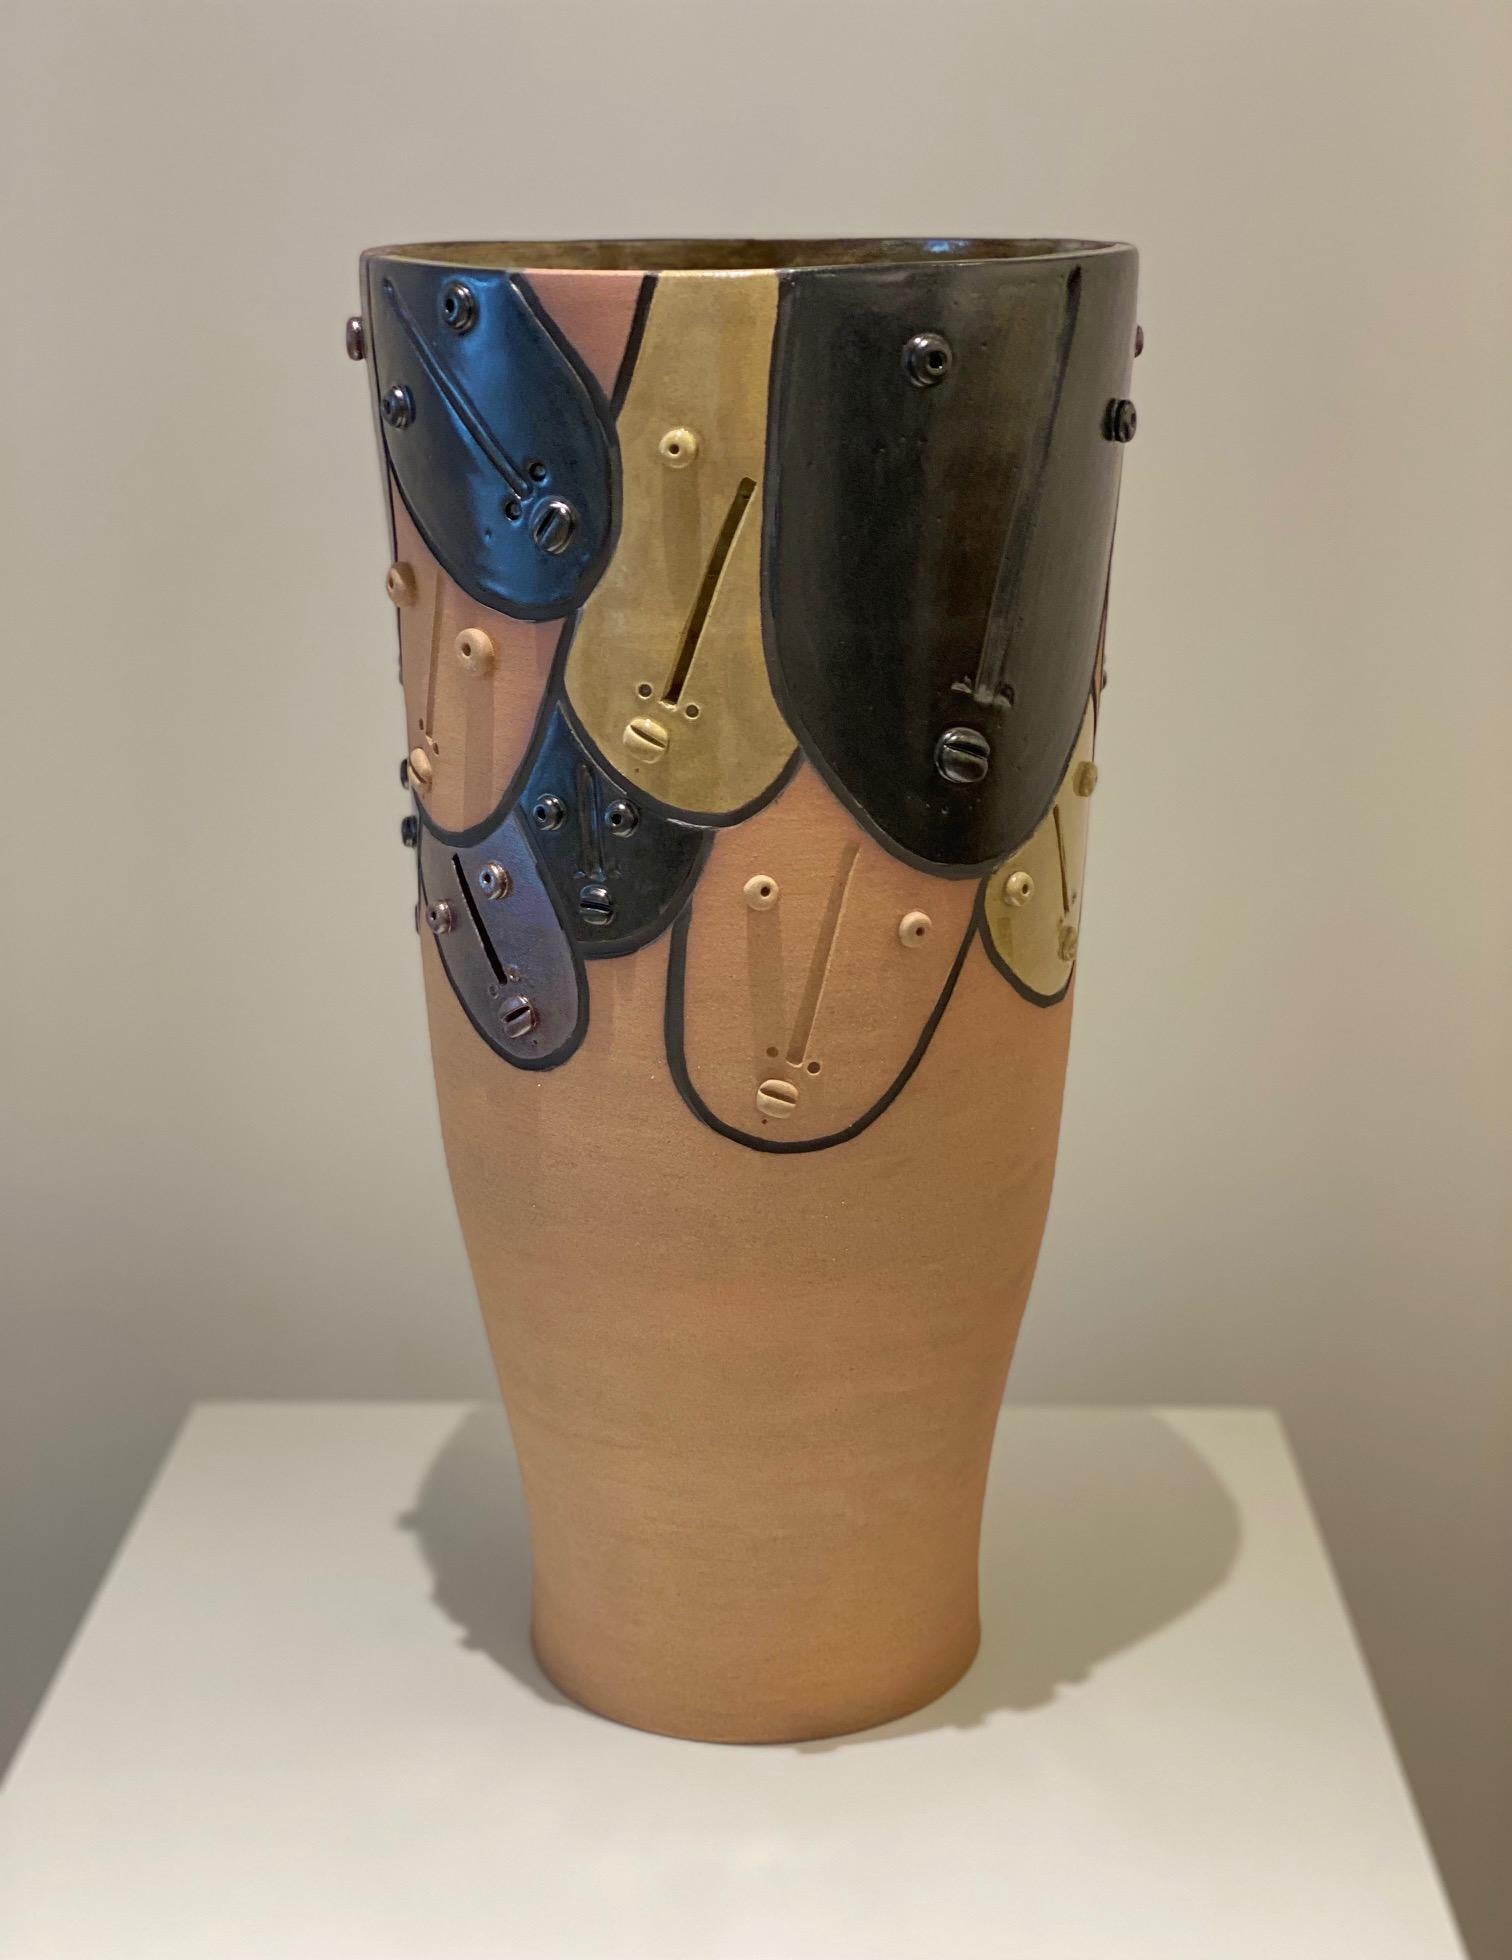 Decorative vase in clay with stylized faces, handmade and signed by French ceramicists Dalo
Earthenware with satin black /grey /beige enamels. One of a kind
Measures: H 43 cm x L 22 cm.
A Smaller size vase is also available.
 